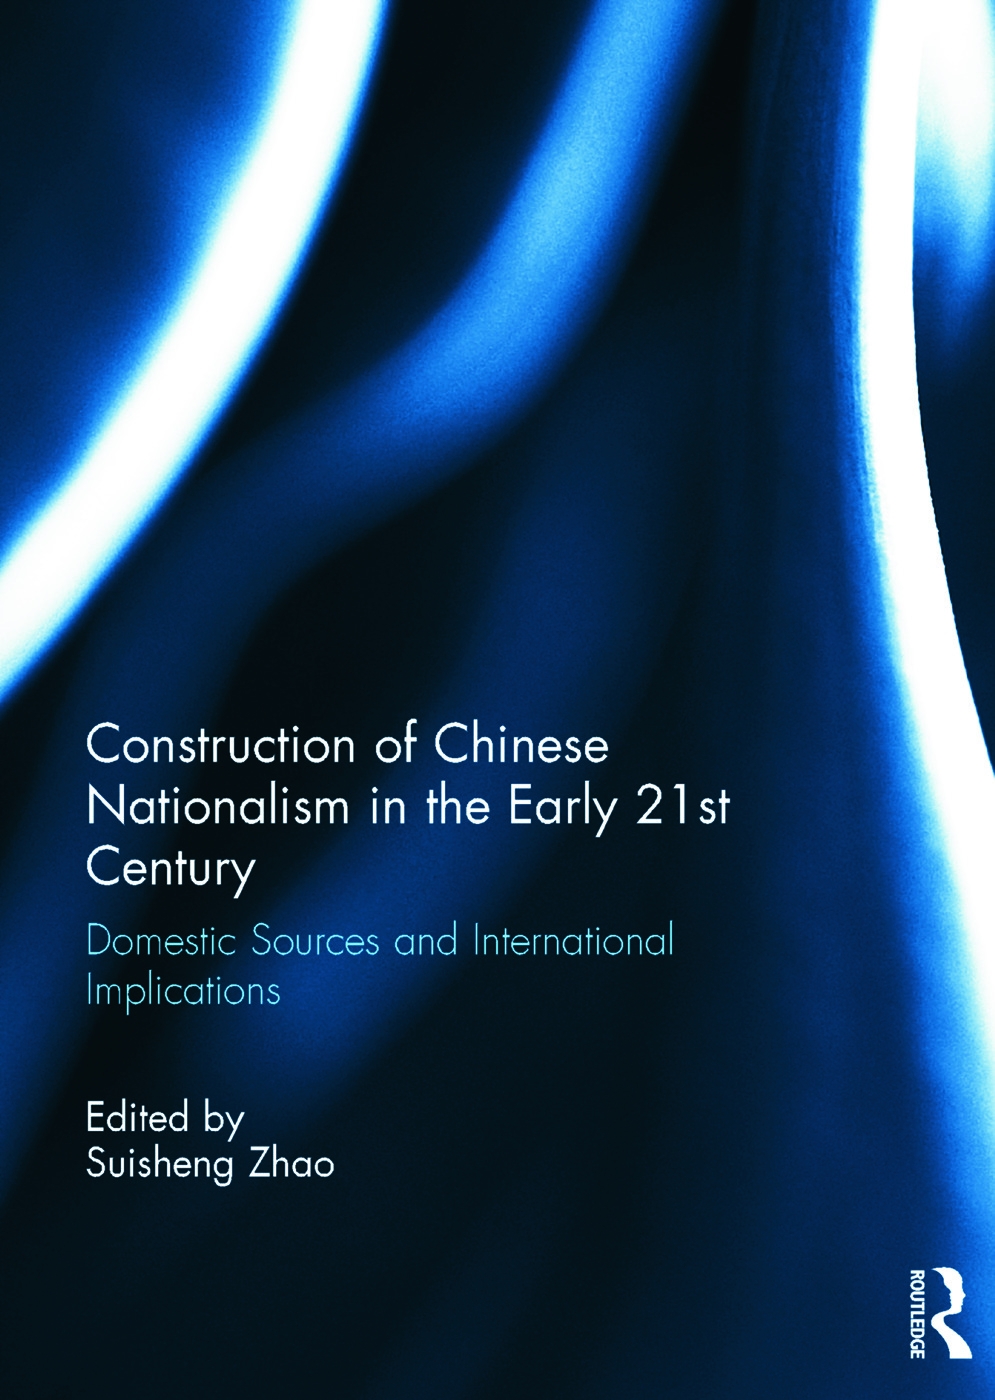 Construction of Chinese Nationalism in the Early 21st Century: Domestic Sources and International Implications